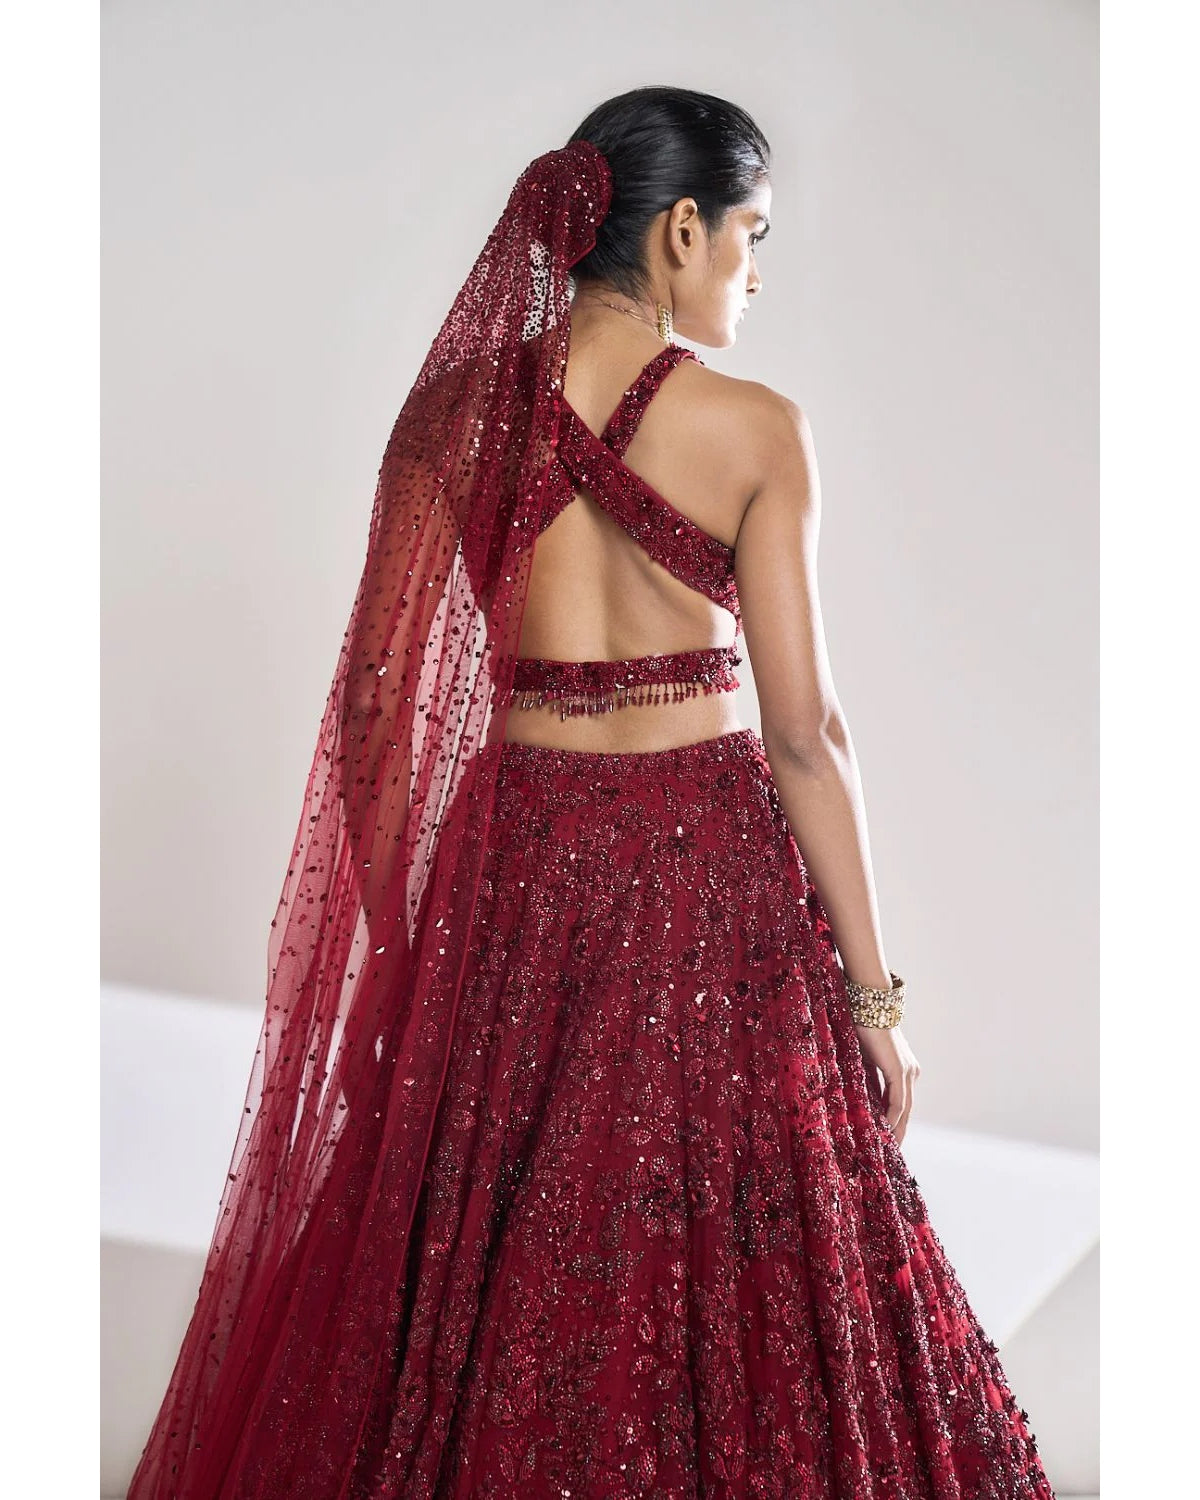 Best Outfits For The Sister Of The Bride & Groom (According To Wedding  Functions) | Wedding lehenga designs, Indian wedding dress, Indian wedding  gowns